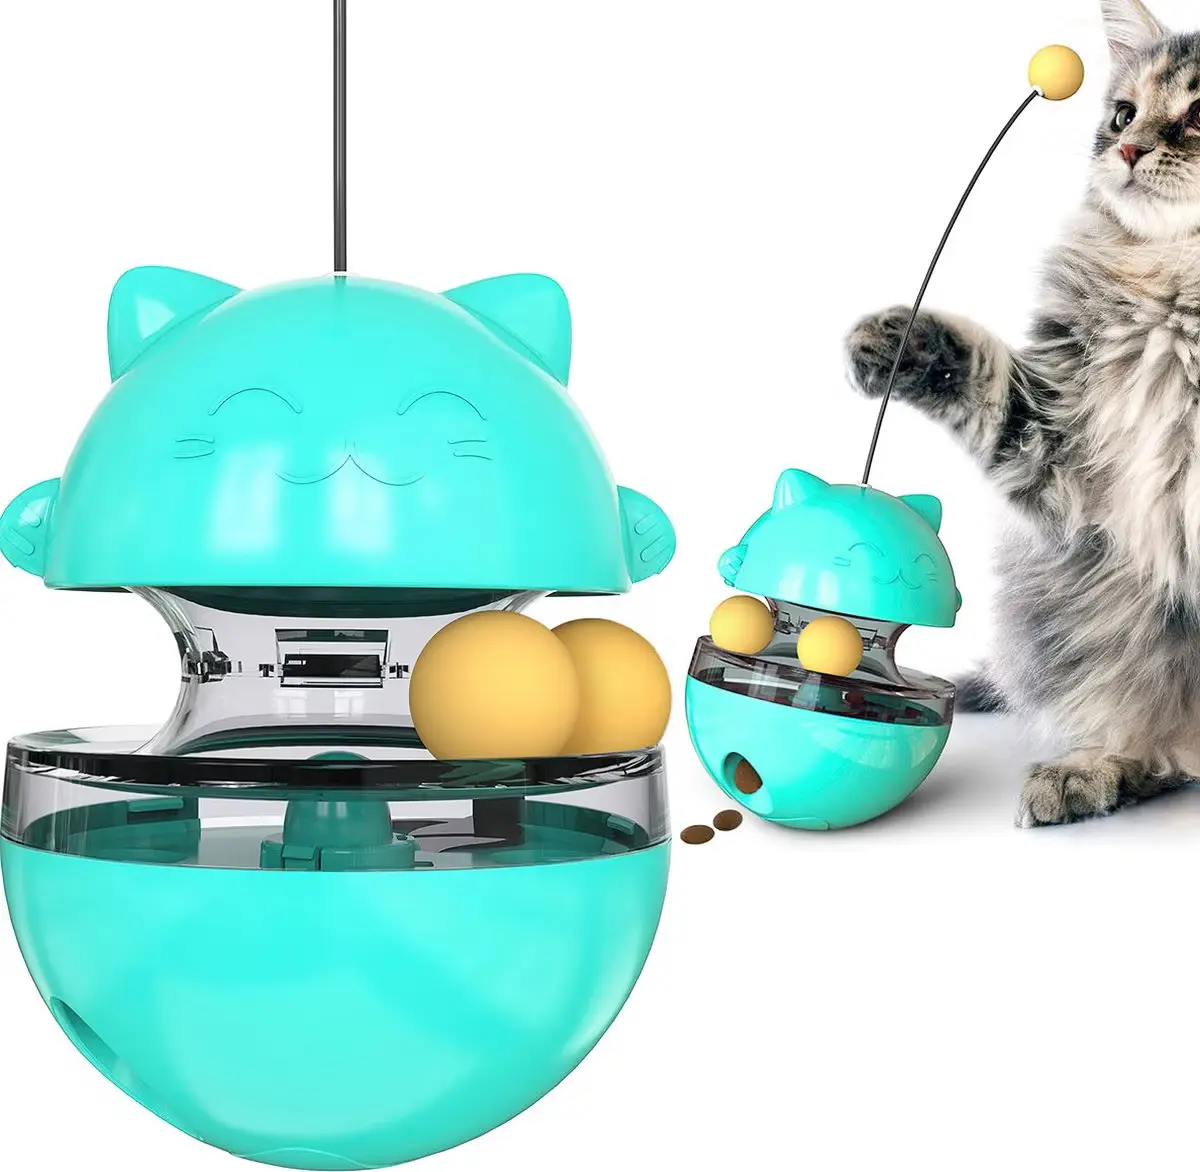 Shele Tumbler Interactive Cat Toy in Turquoise